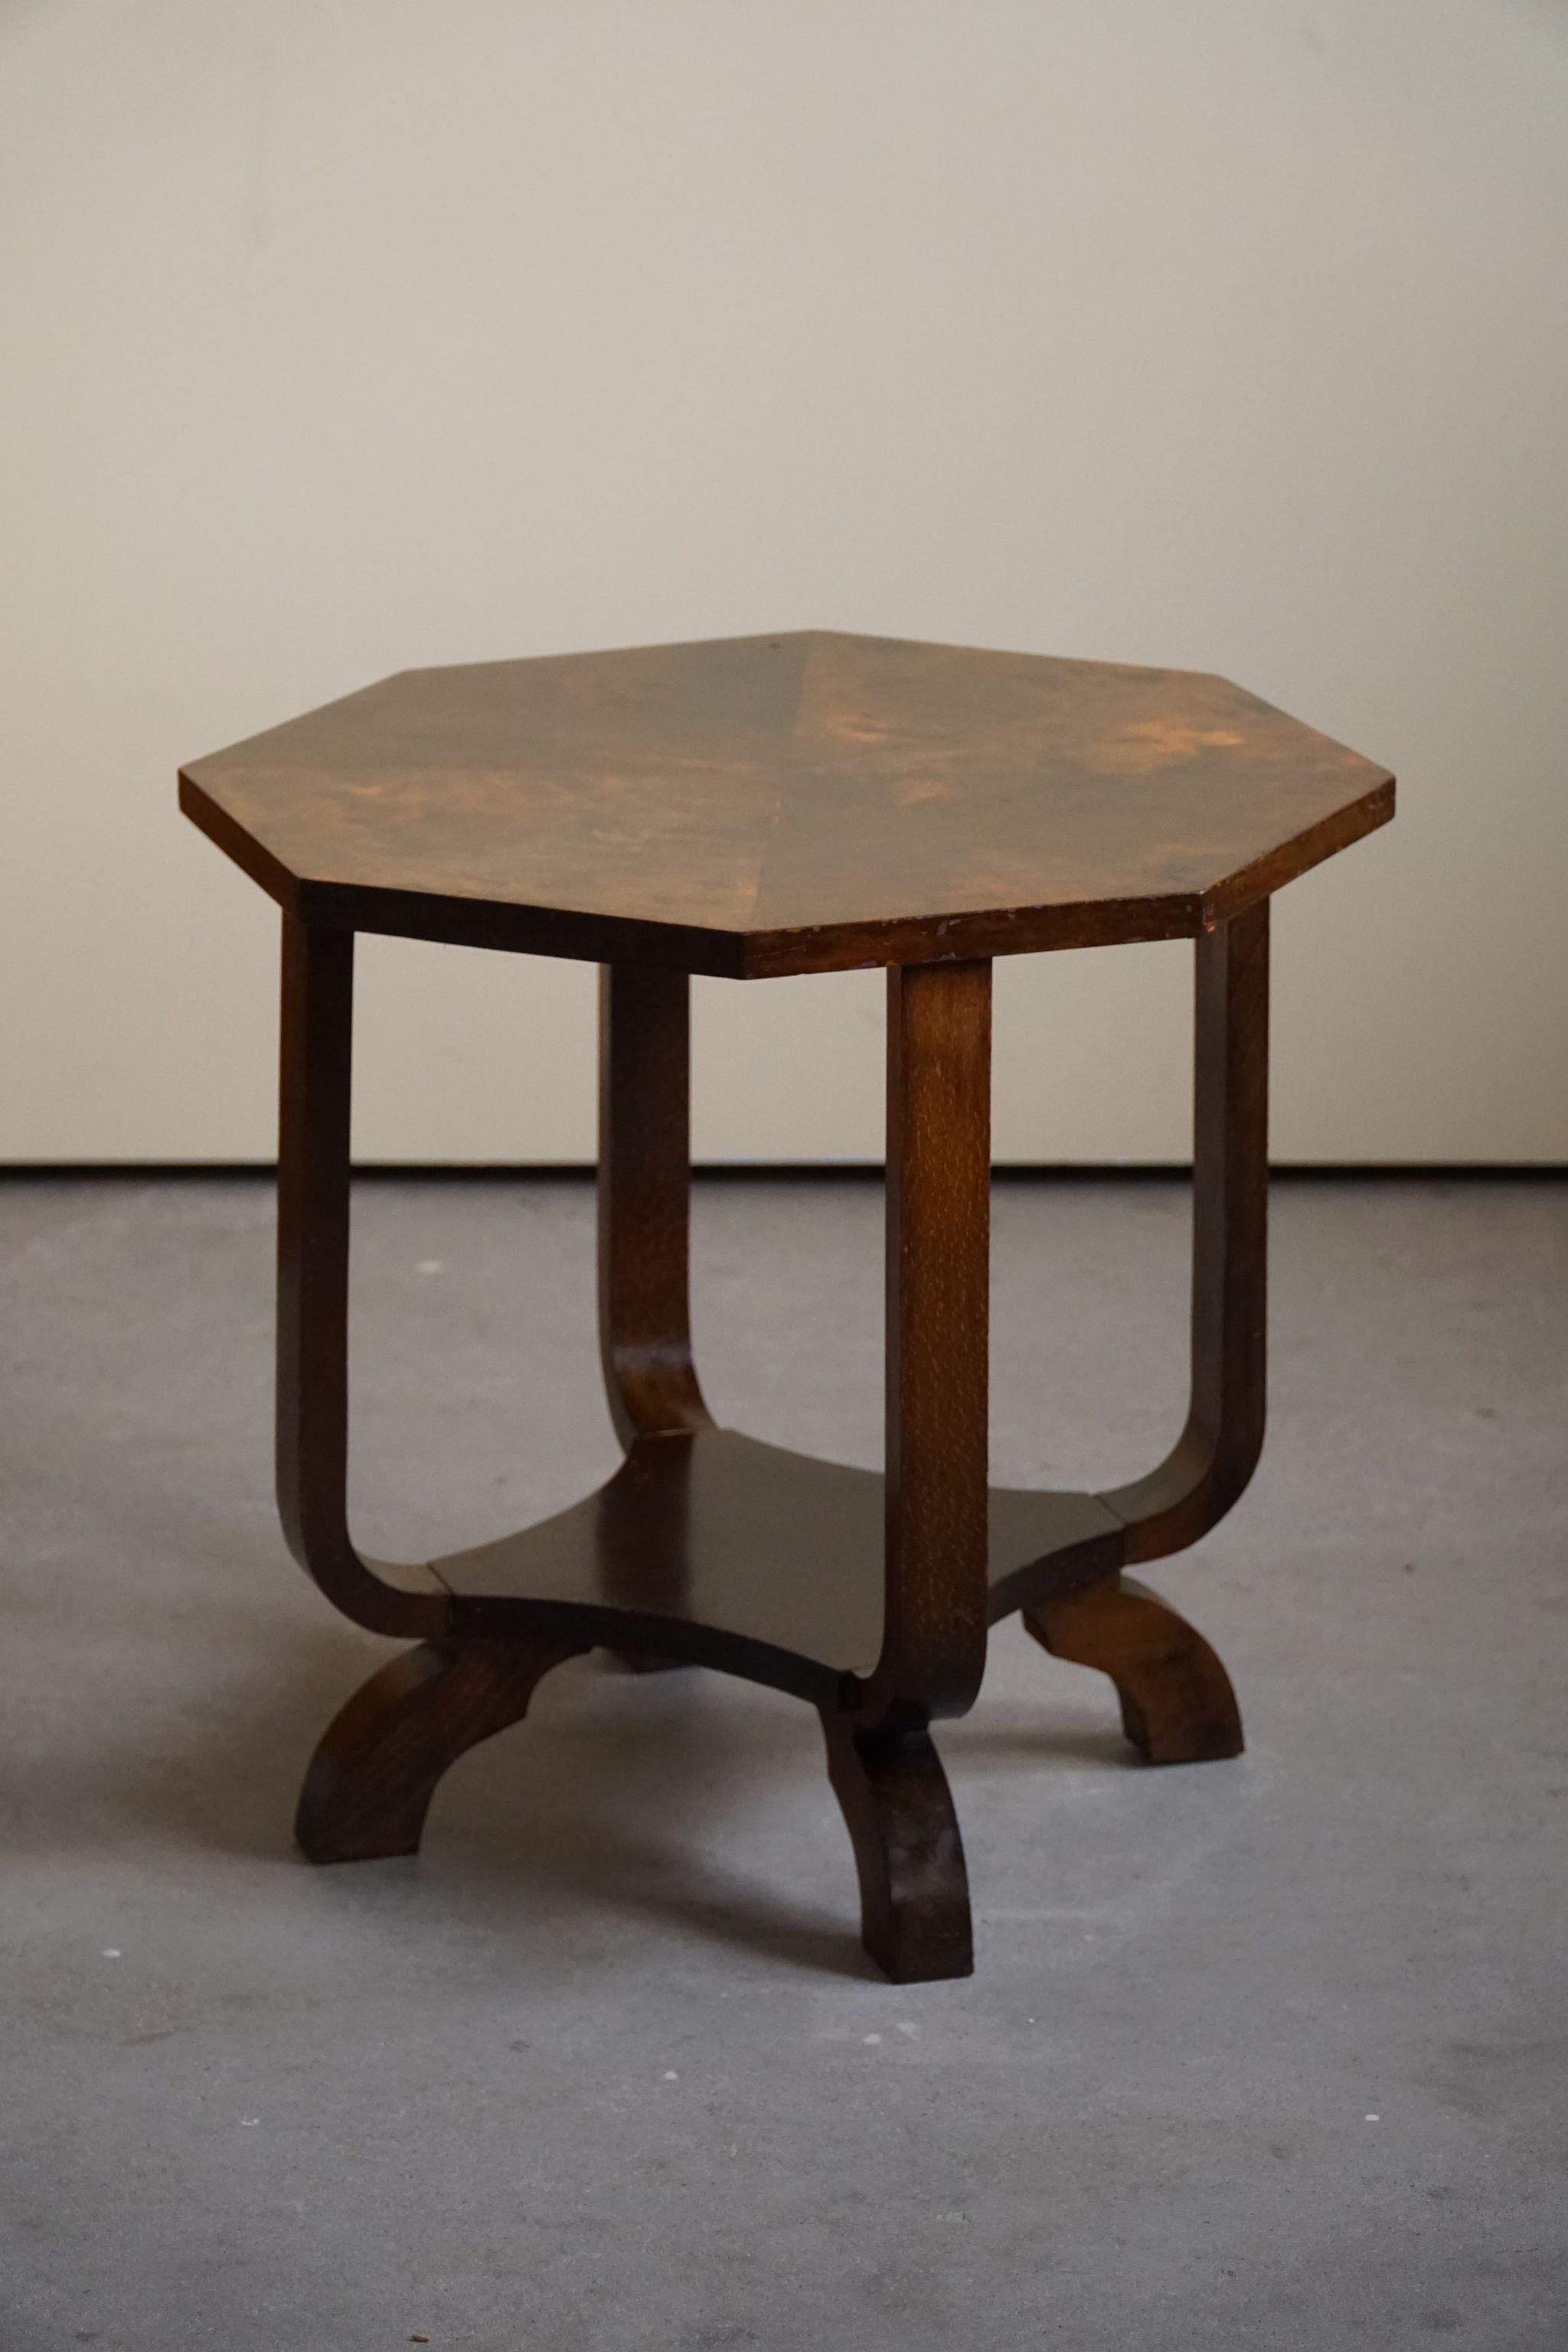 Danish Art Deco Side Table / Coffee Table in Flamed Birch, 1940s 1